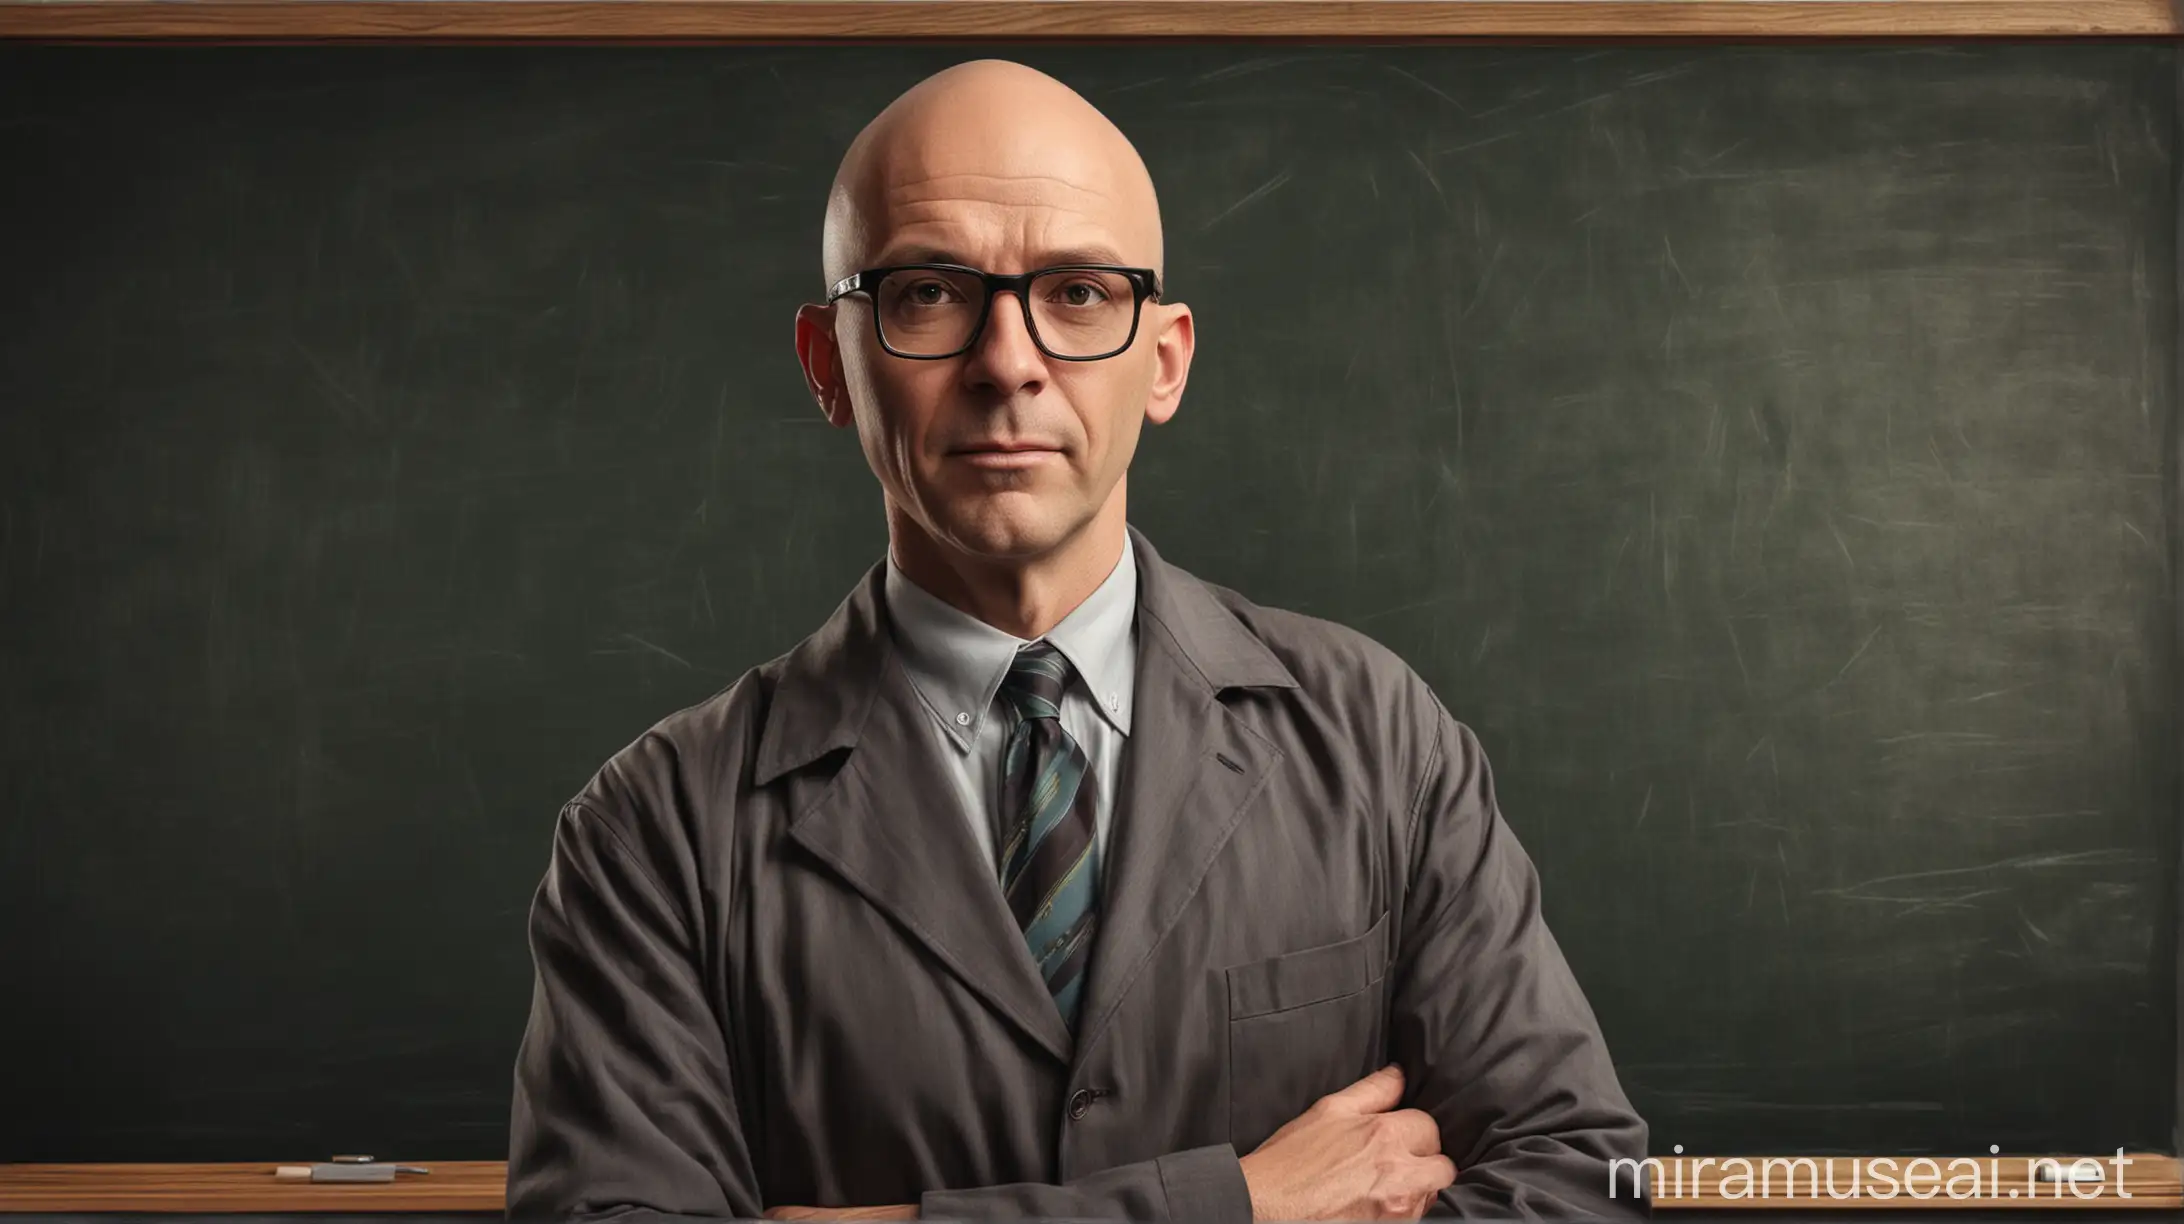 middle-aged bald university teacher, standing in front of a chalkboard, realistic comic book style